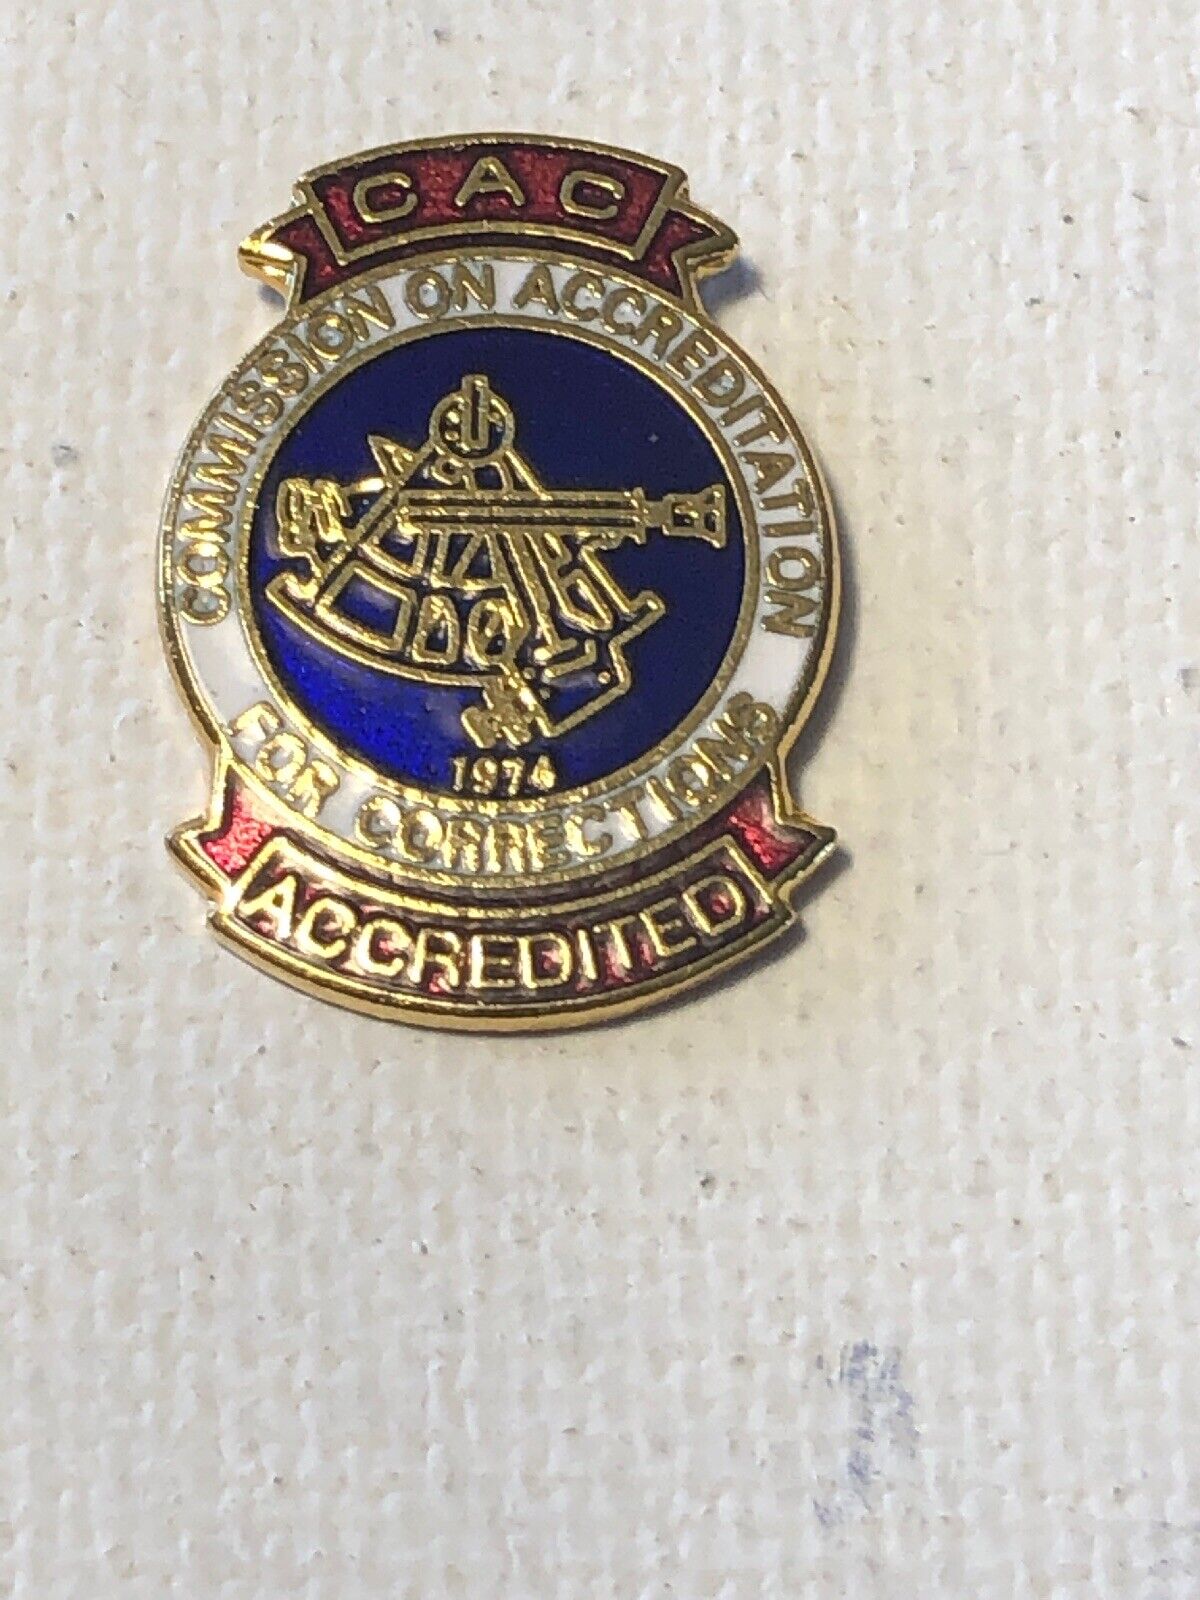 RARE 1974 CAC Commision On Accreditation For Corrections ACCREDITATED Lapel Pin